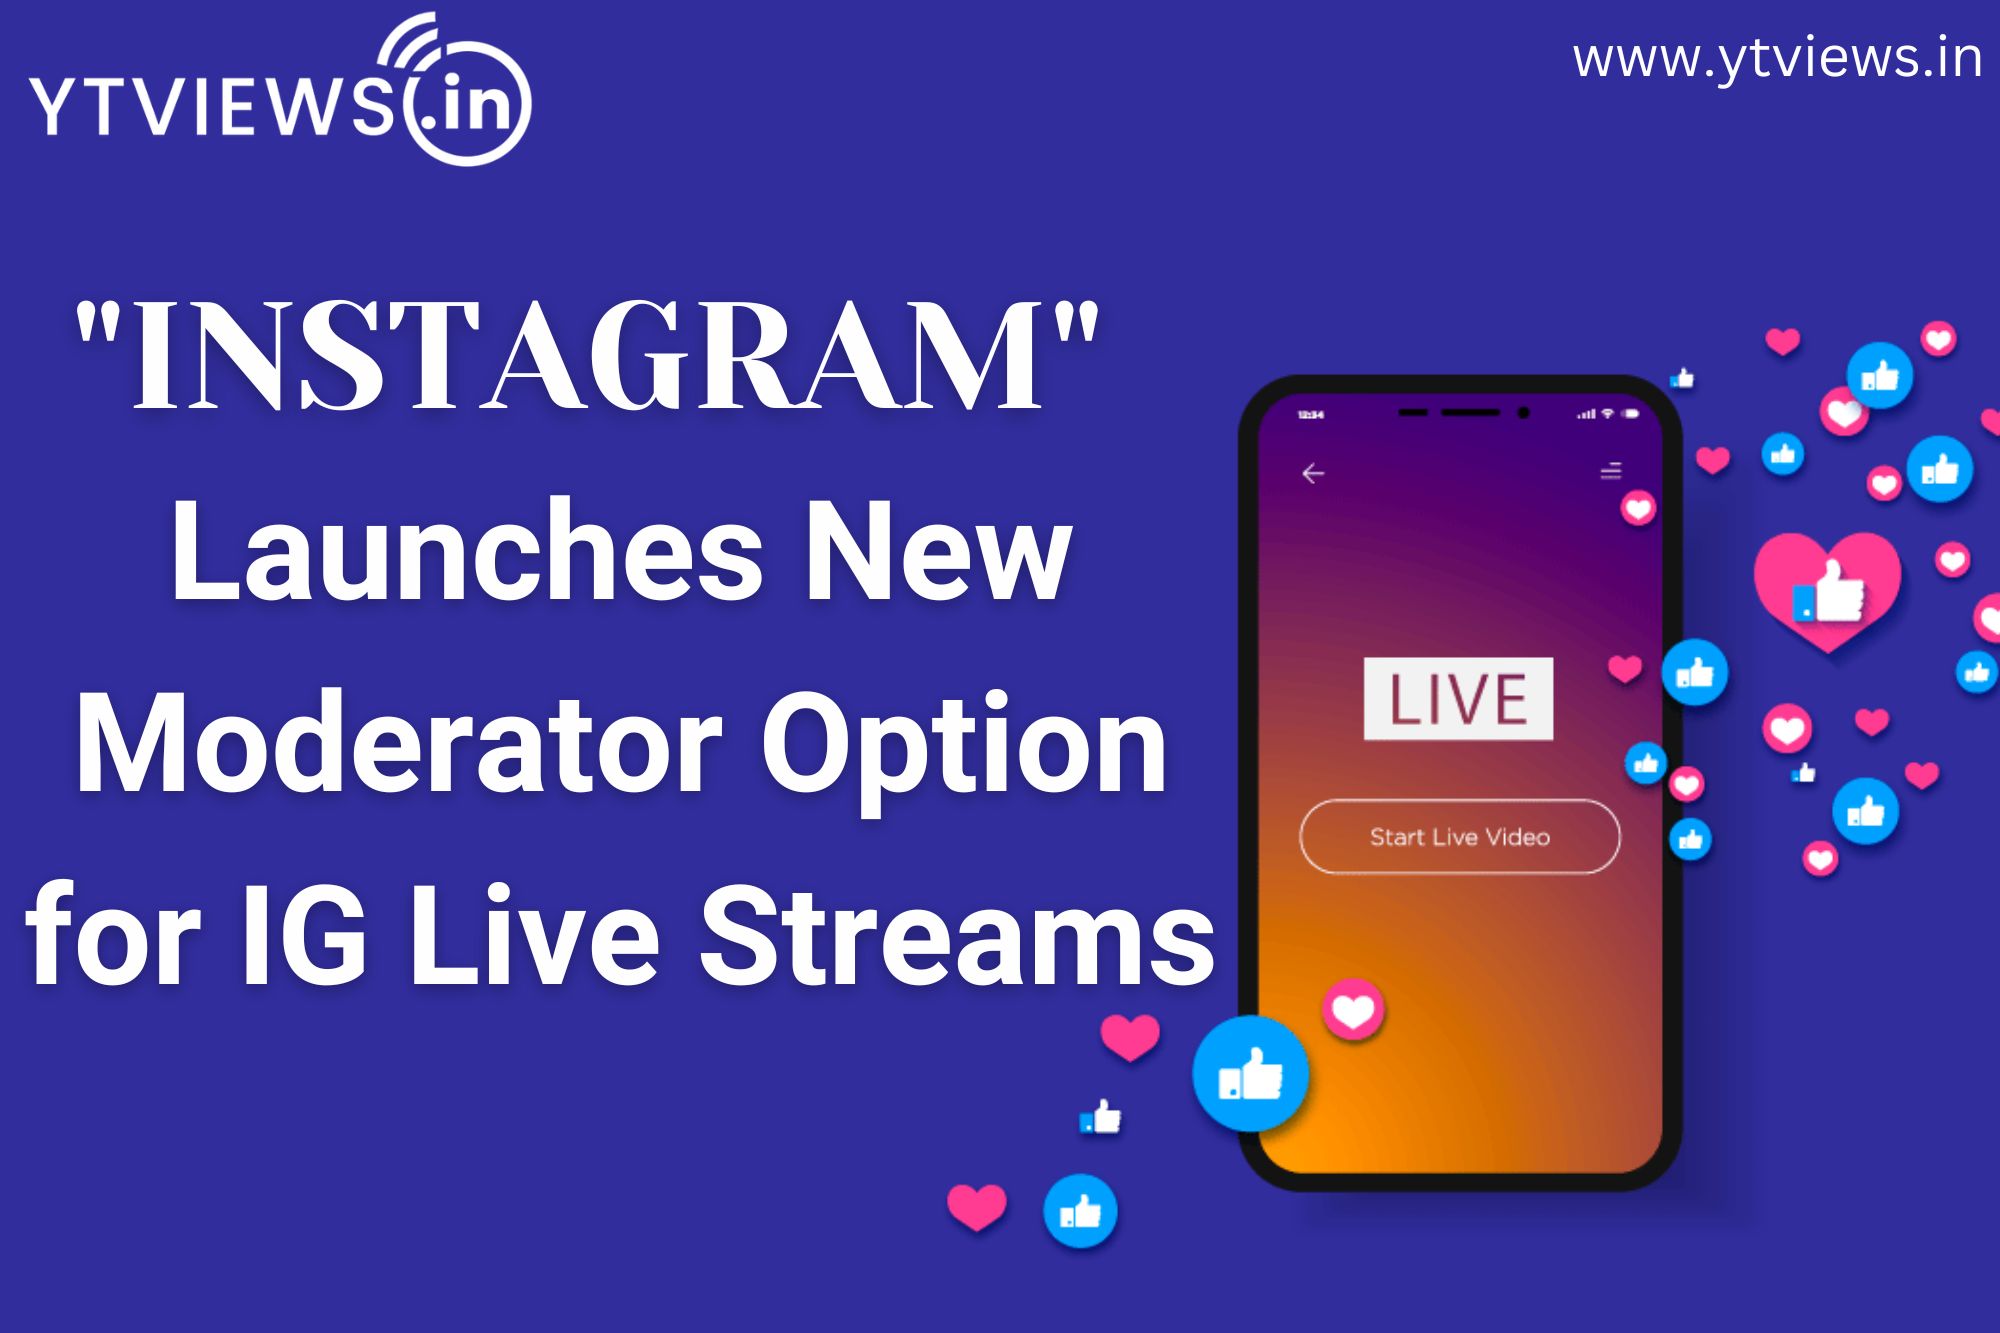 Instagram launches new moderator option for IG Live streams